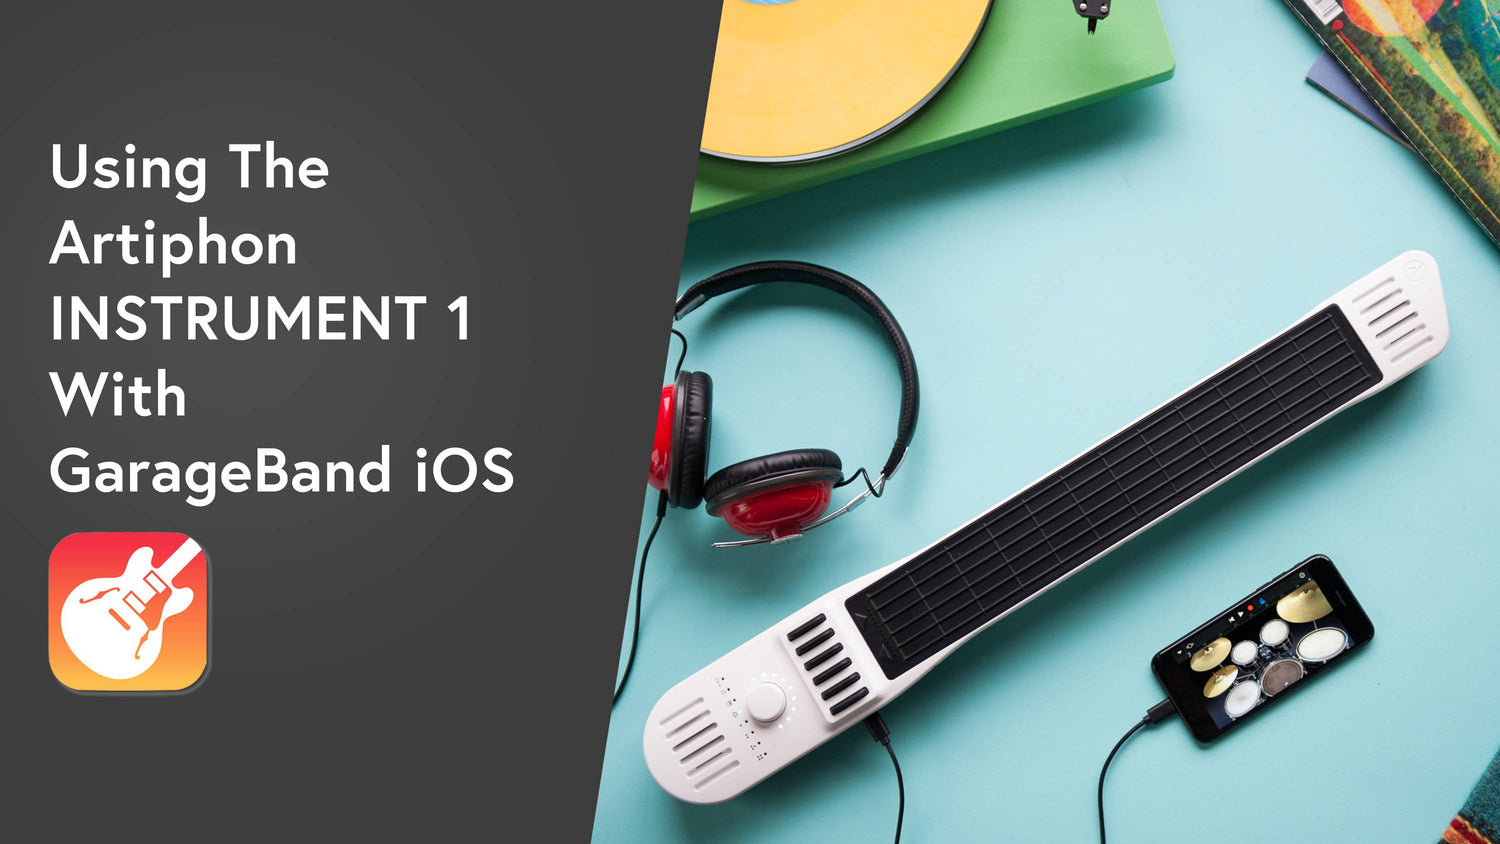 How to Connect the Artiphon INSTRUMENT 1 to Apple's GarageBand for iOS